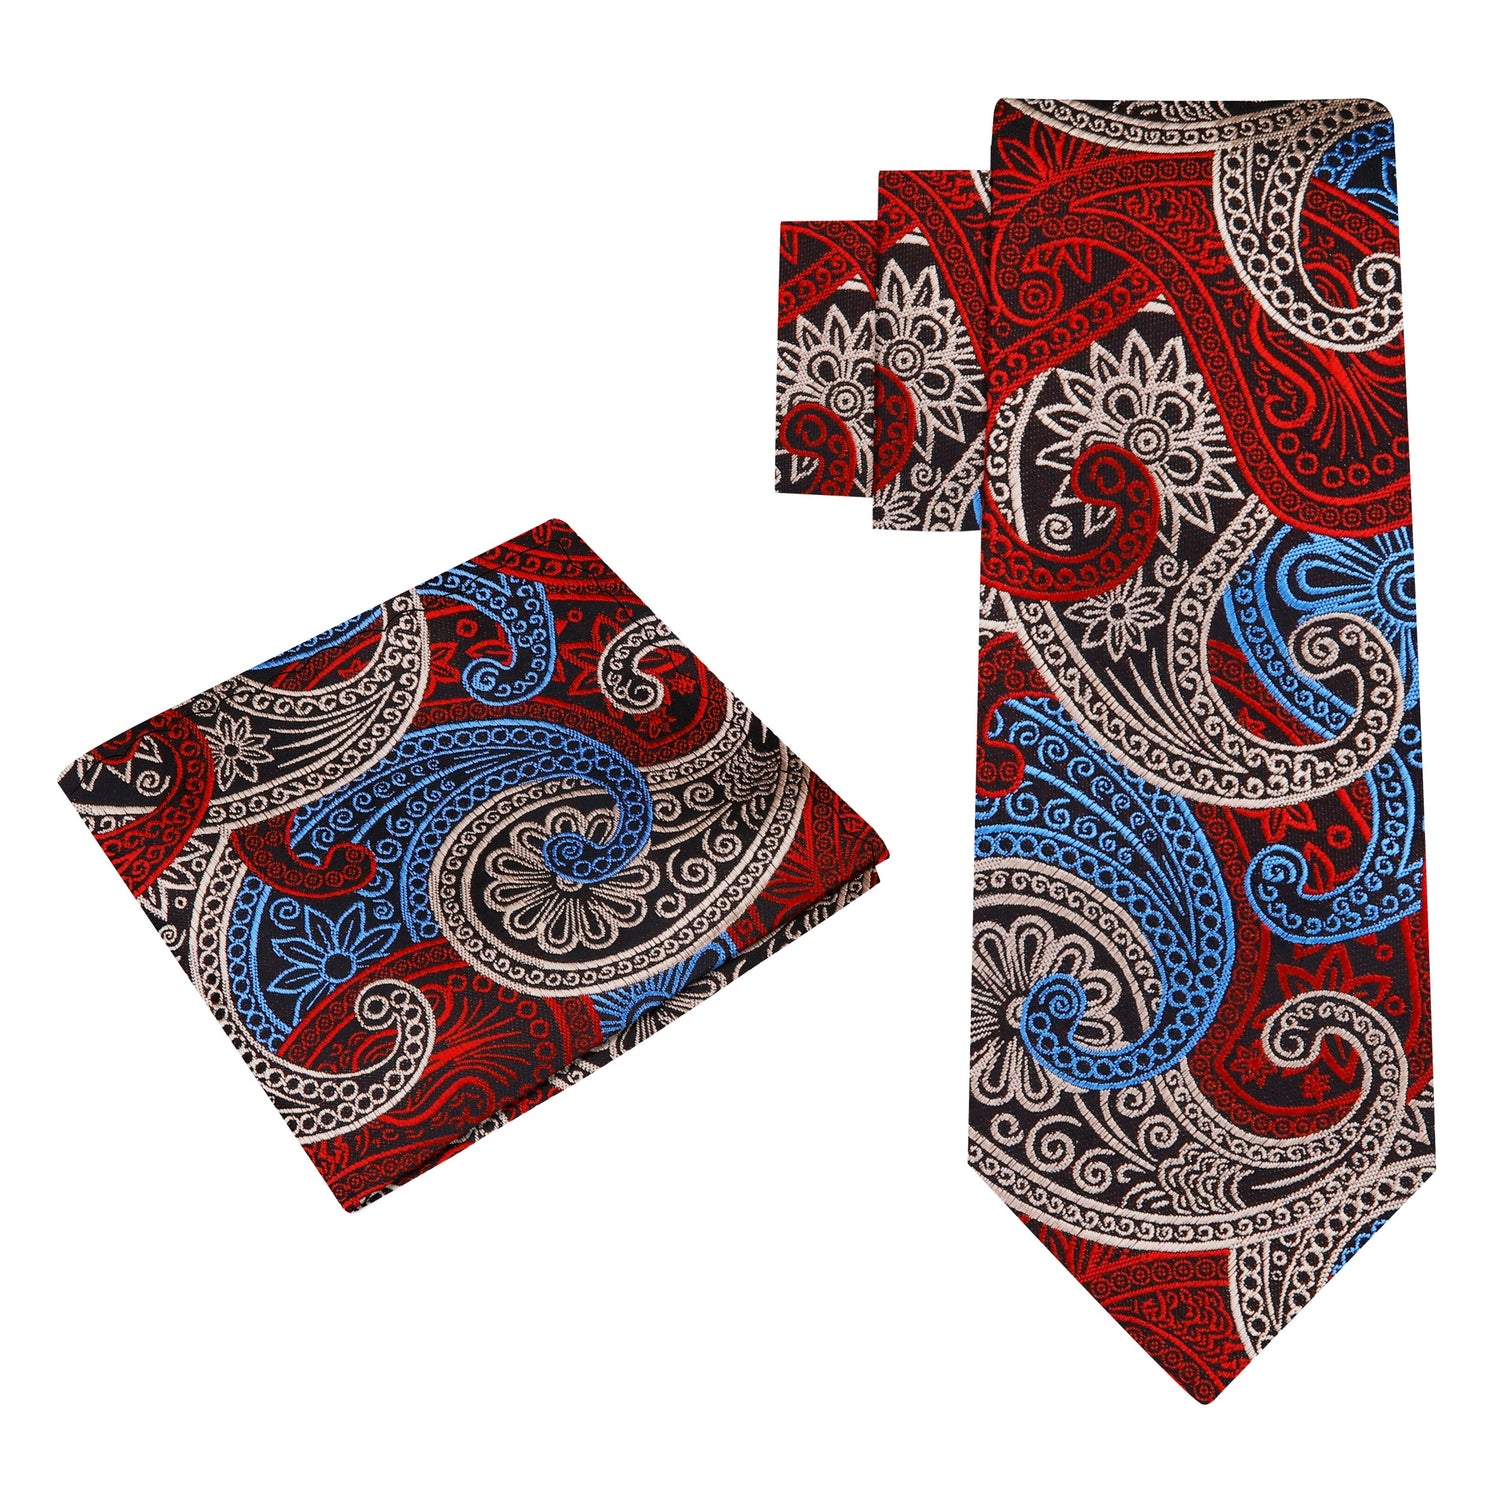 Alt View: A Red, Cream, Light Blue Paisley Pattern Necktie With Matching Pocket Square